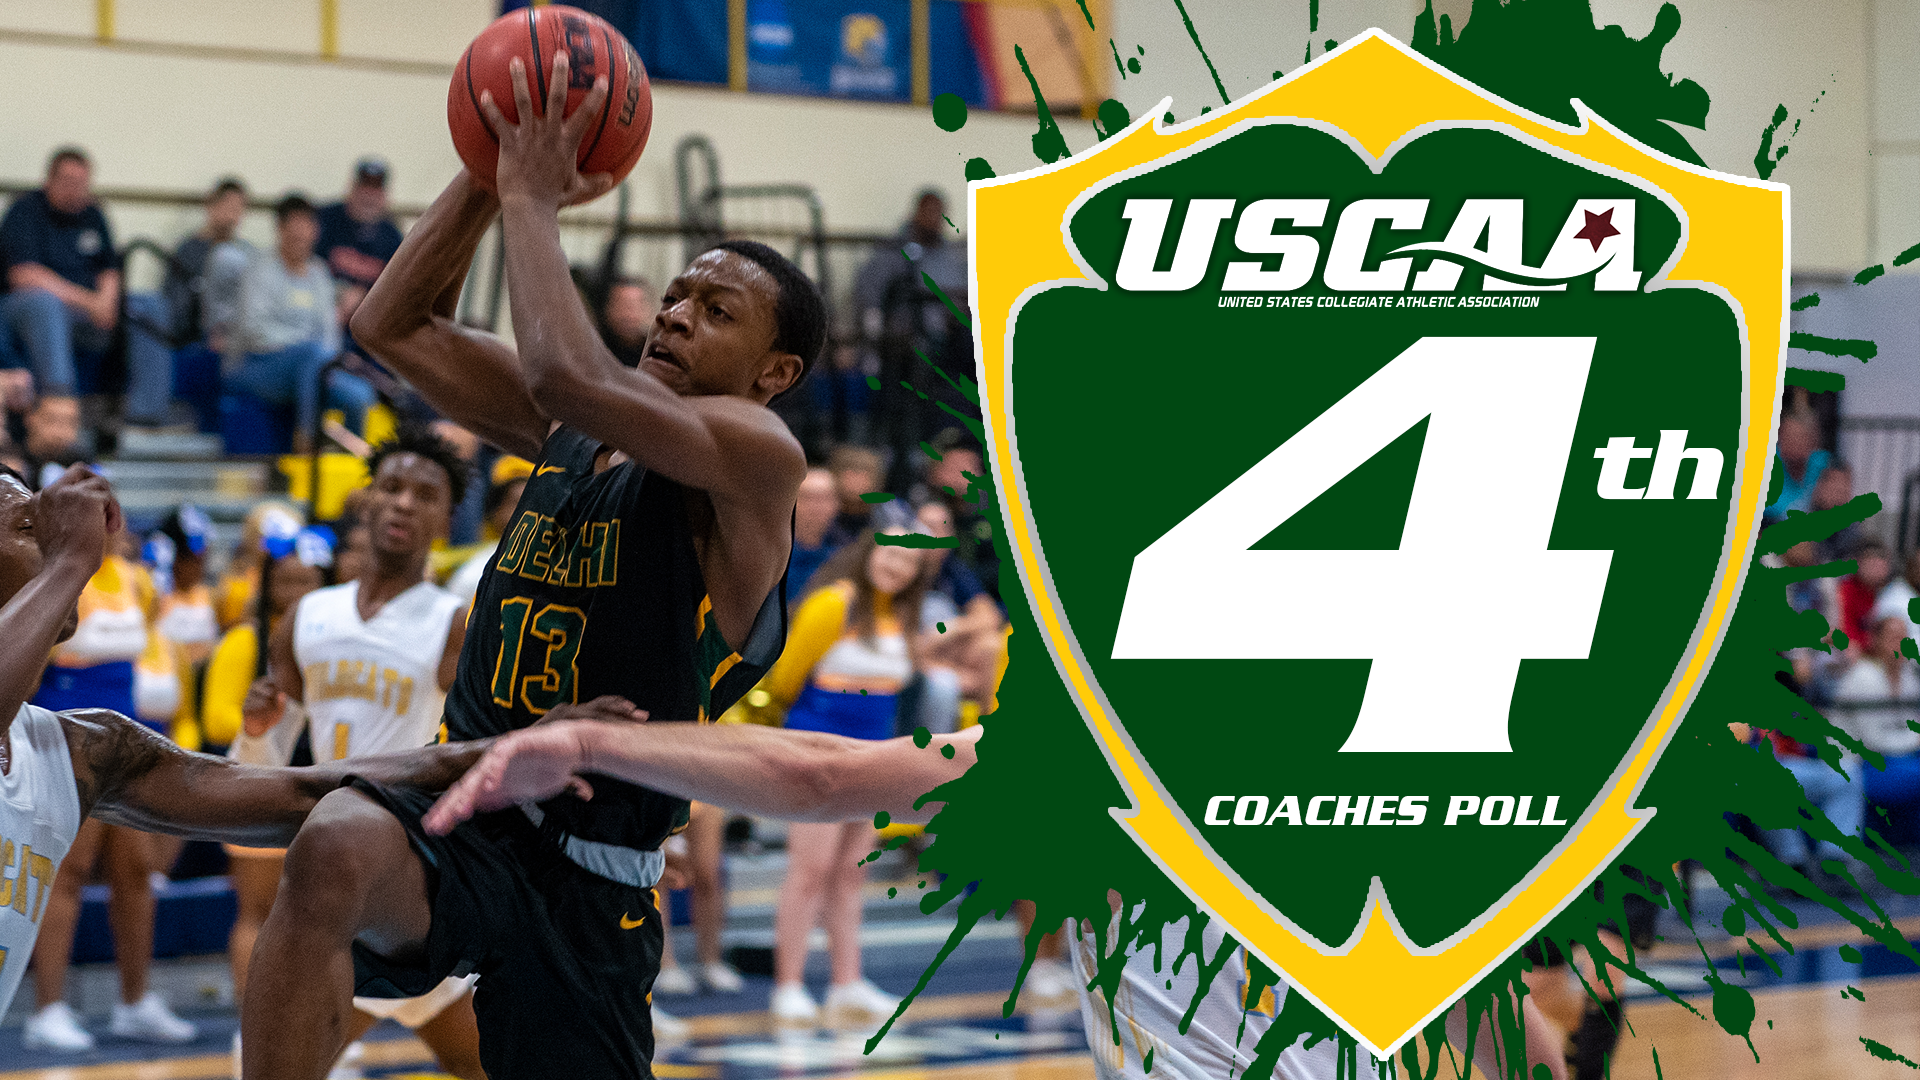 Delhi Rises to Fourth in Newest USCAA Coaches Poll